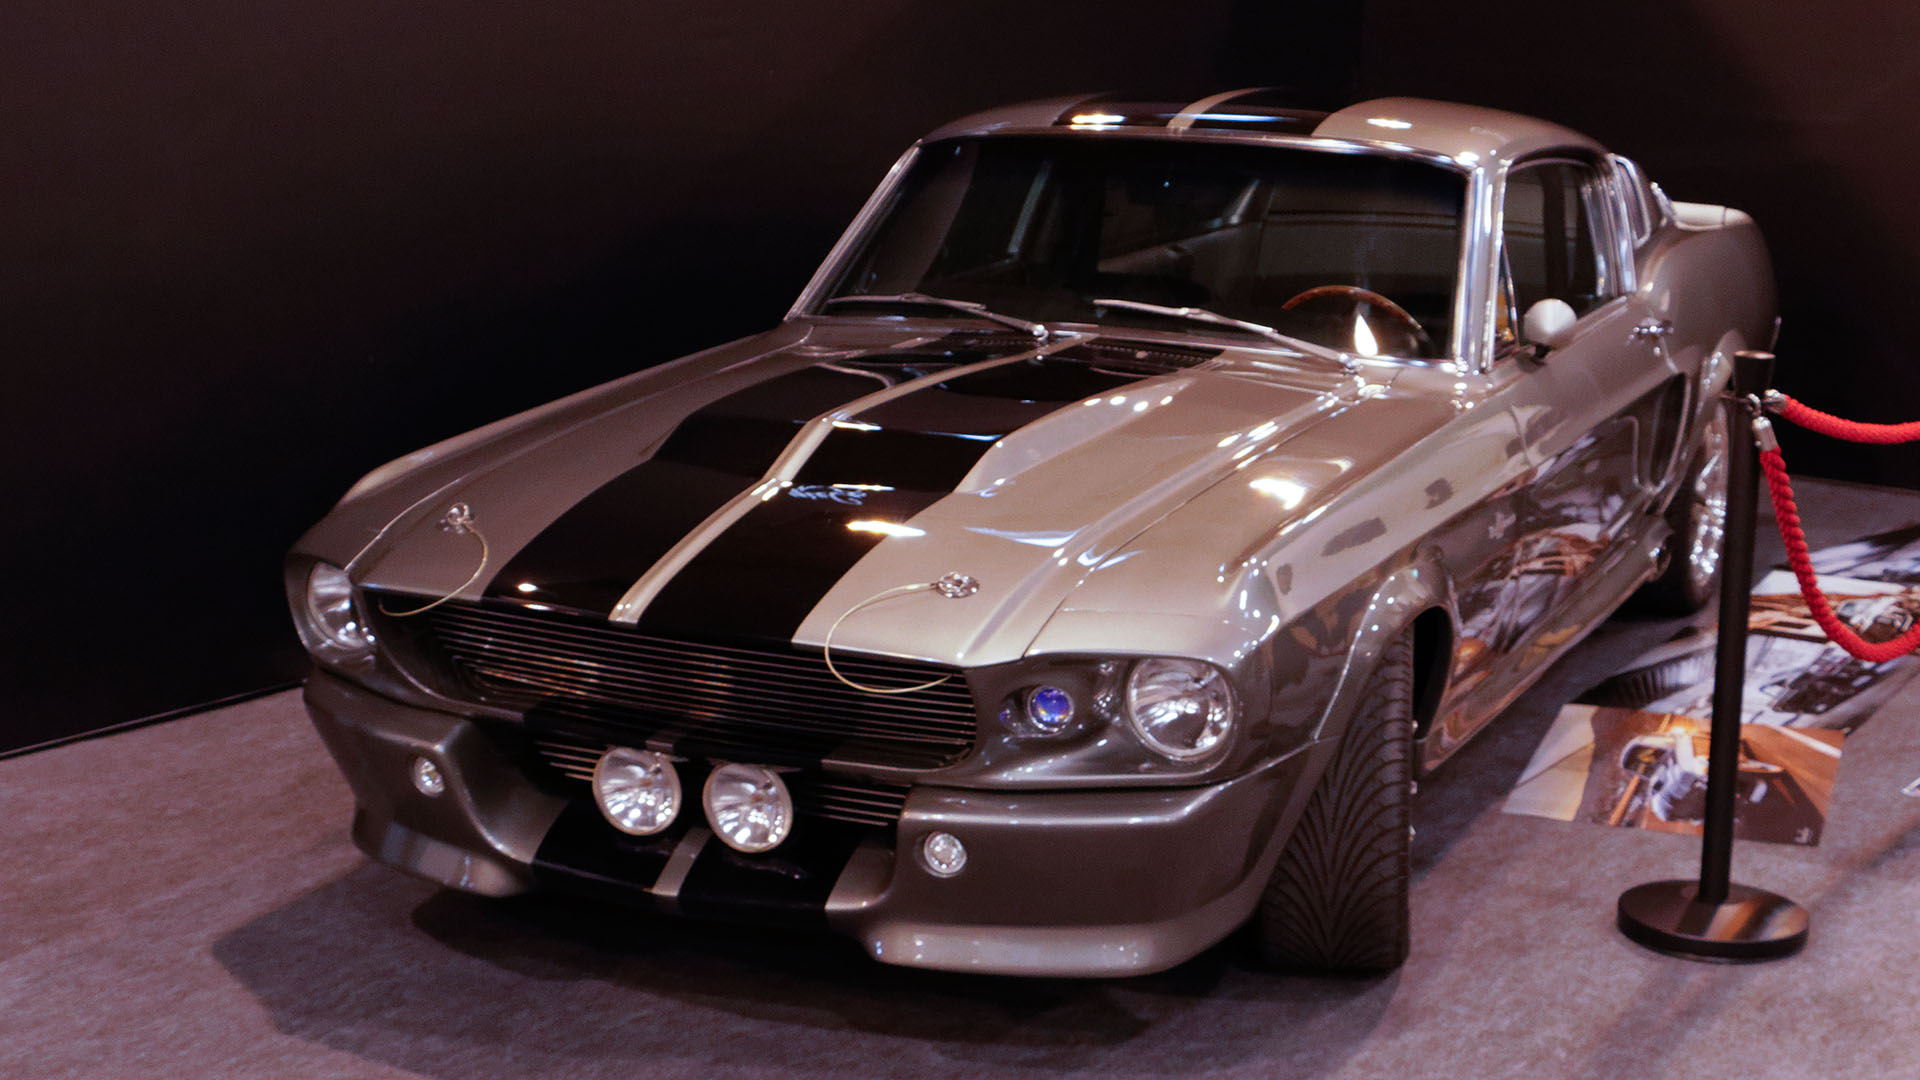 Ford Mustang Eleanor, 'Gone in 60 Seconds' fame, American muscle, Collector's favorite, Movie car, 1920x1080 Full HD Desktop